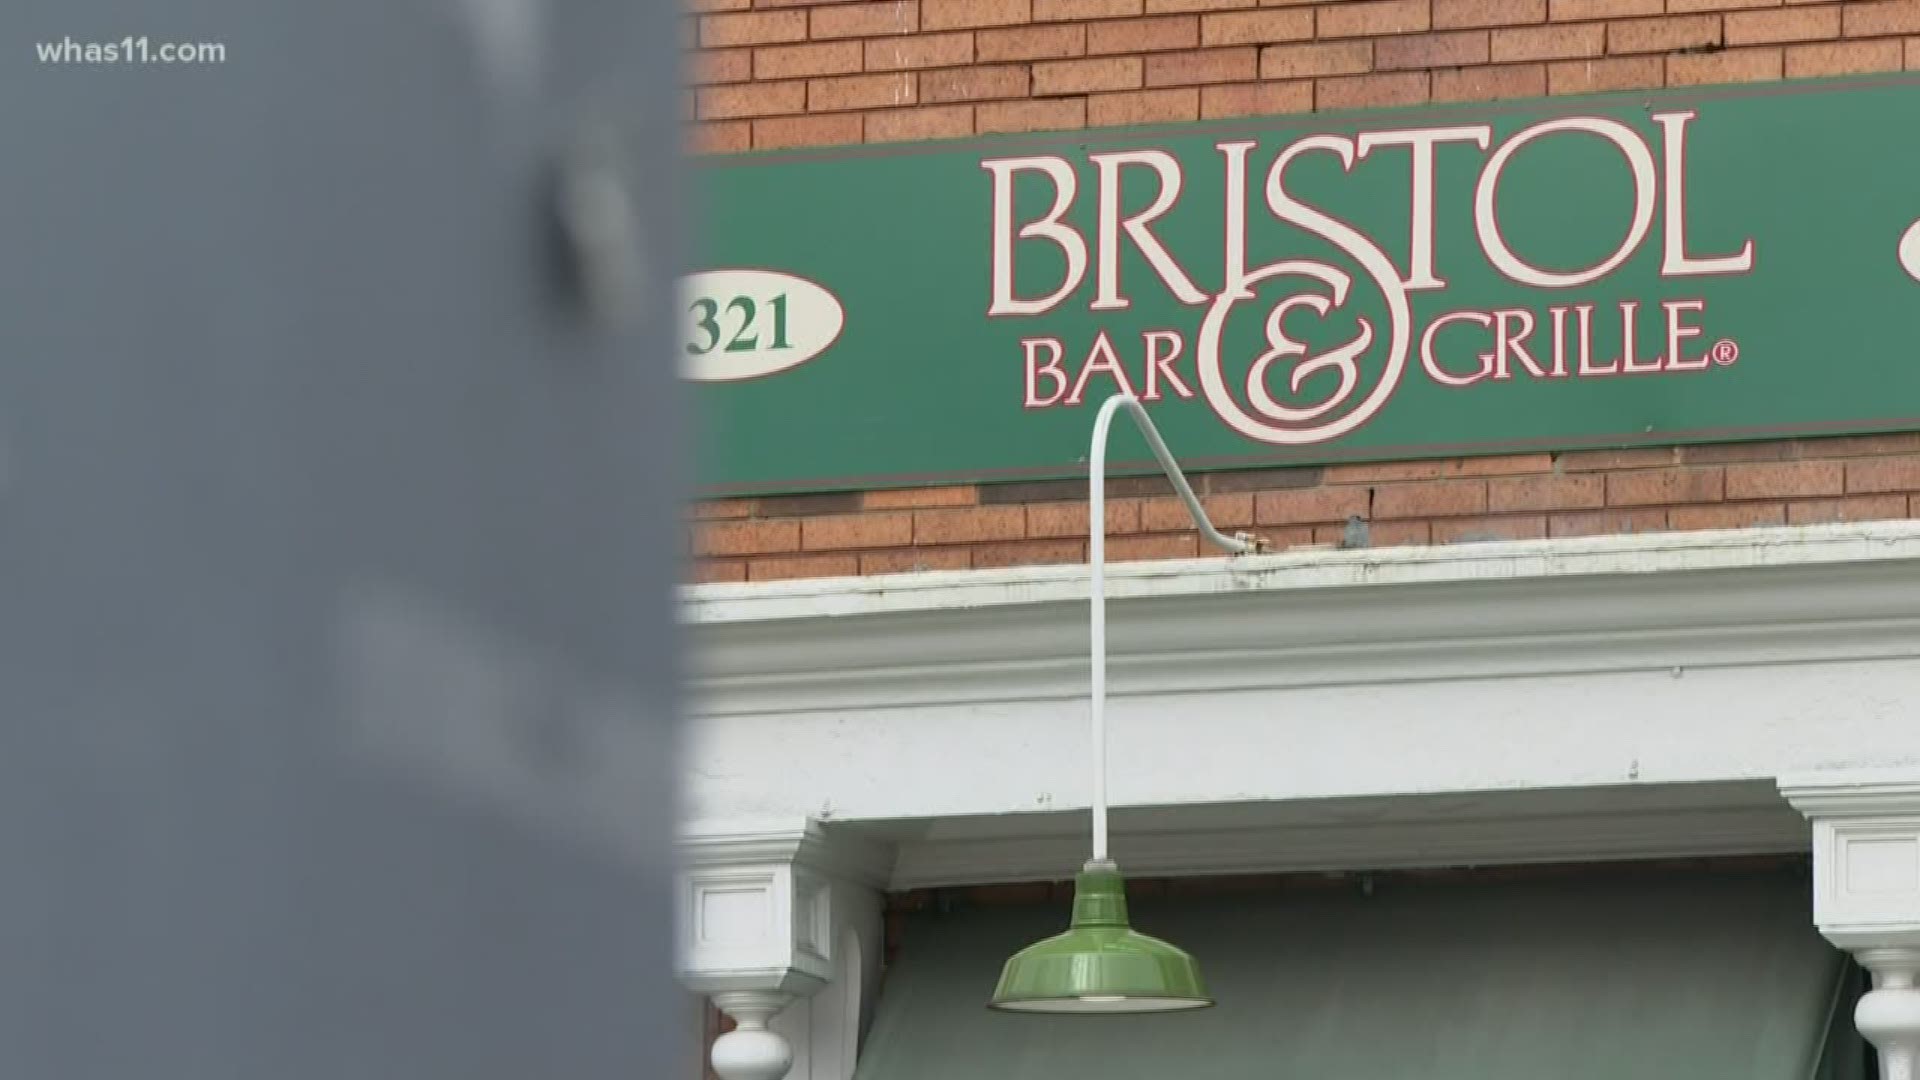 Someone broke into Bristol Bar & Grille, taking 20 bottles of bourbon worth nearly $1,500.